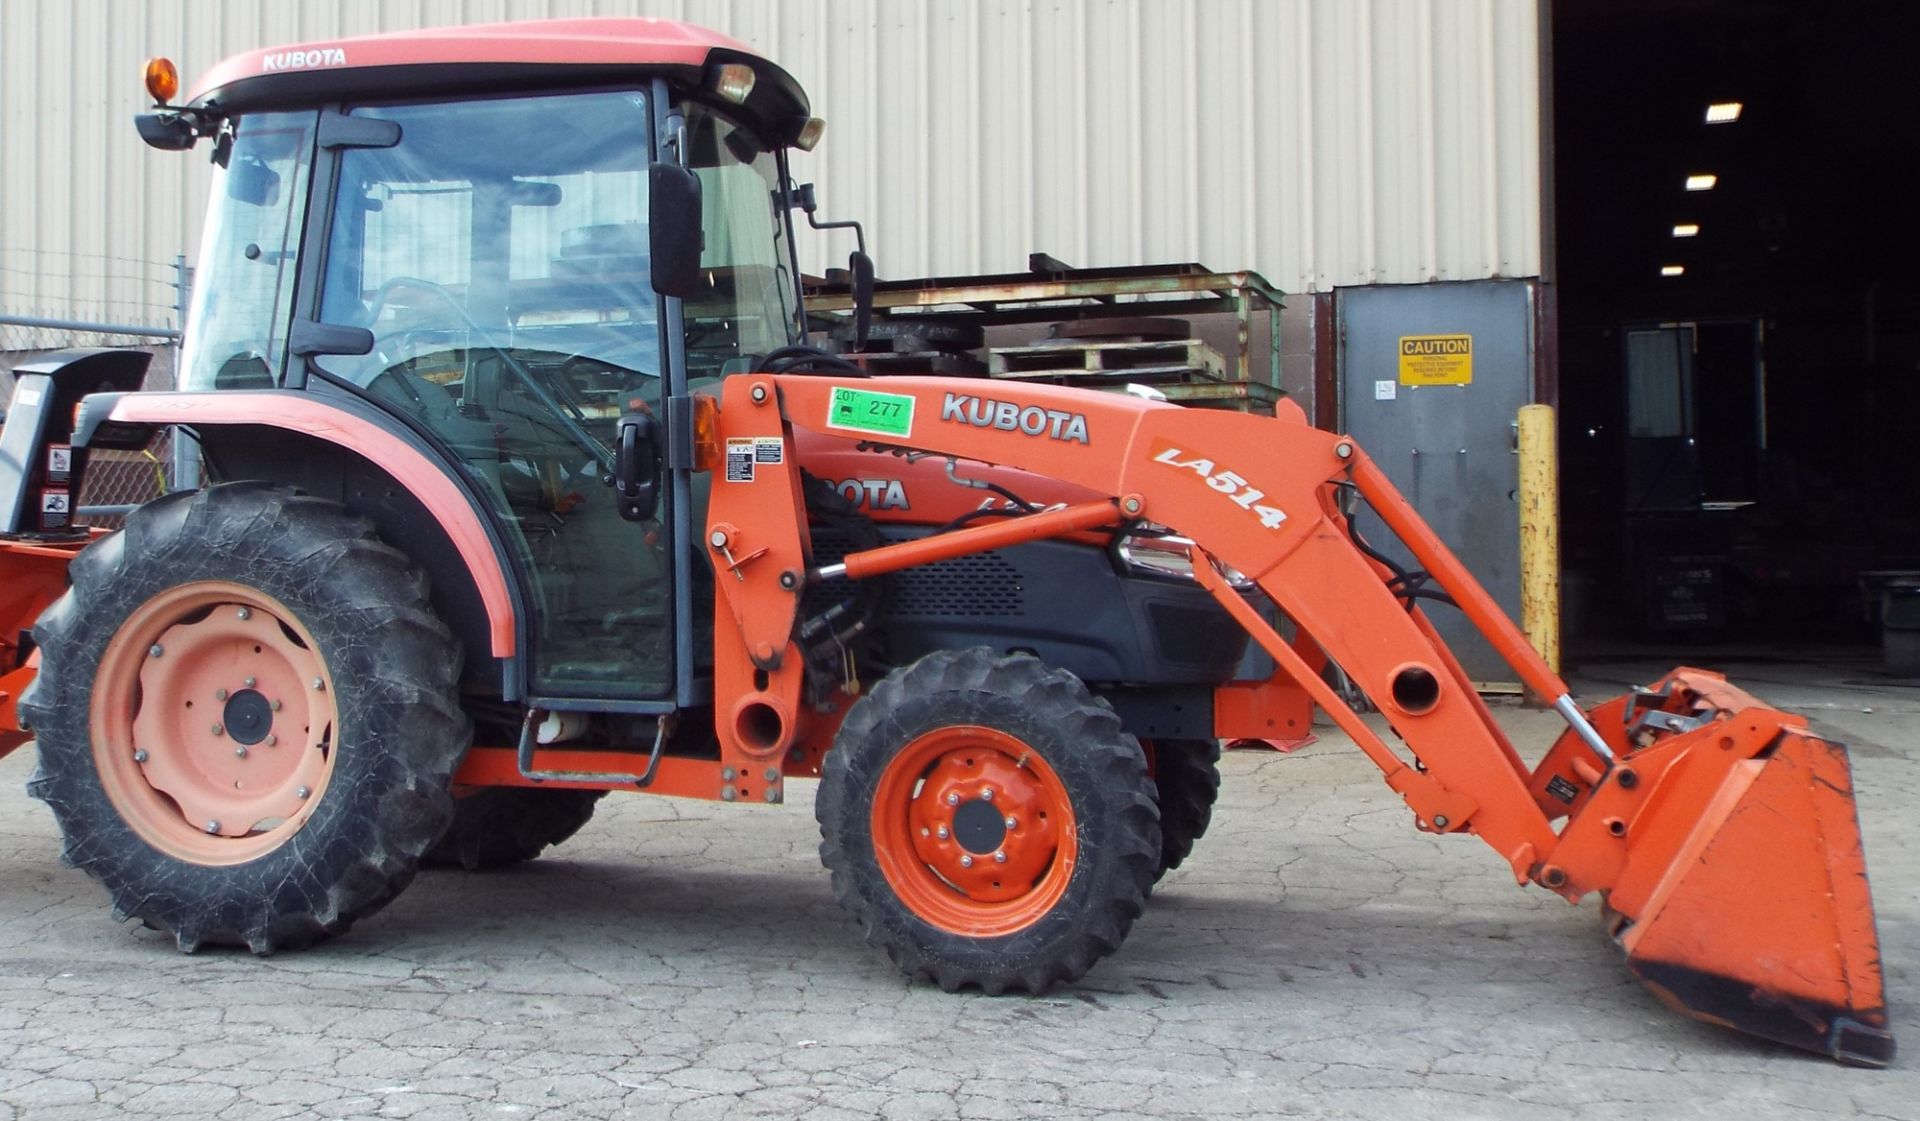 KUBOTA L3540 COMPACT UTILITY TRACTOR WITH KUBOTA 1.8L 3 CYLINDER DIESEL ENGINE, HST PLUS HYDROSTATIC - Image 2 of 11